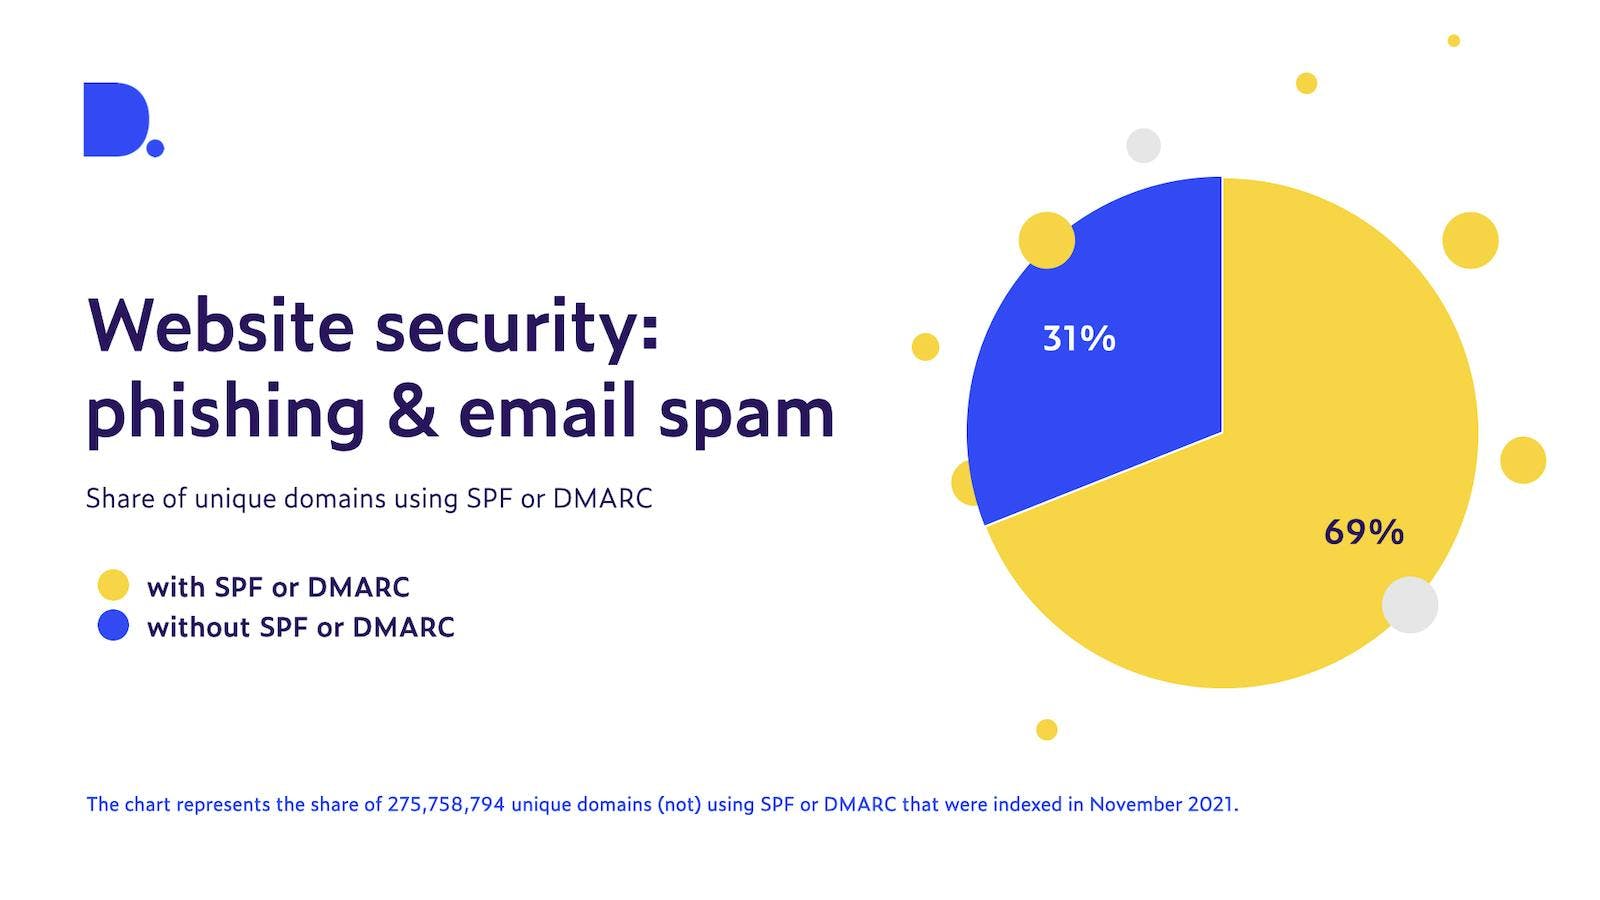 Pie chart showing the number of unique domains that are and are not using SPF or DMARC. 69% of websites is using SPF or Dmarc, 31% is not.